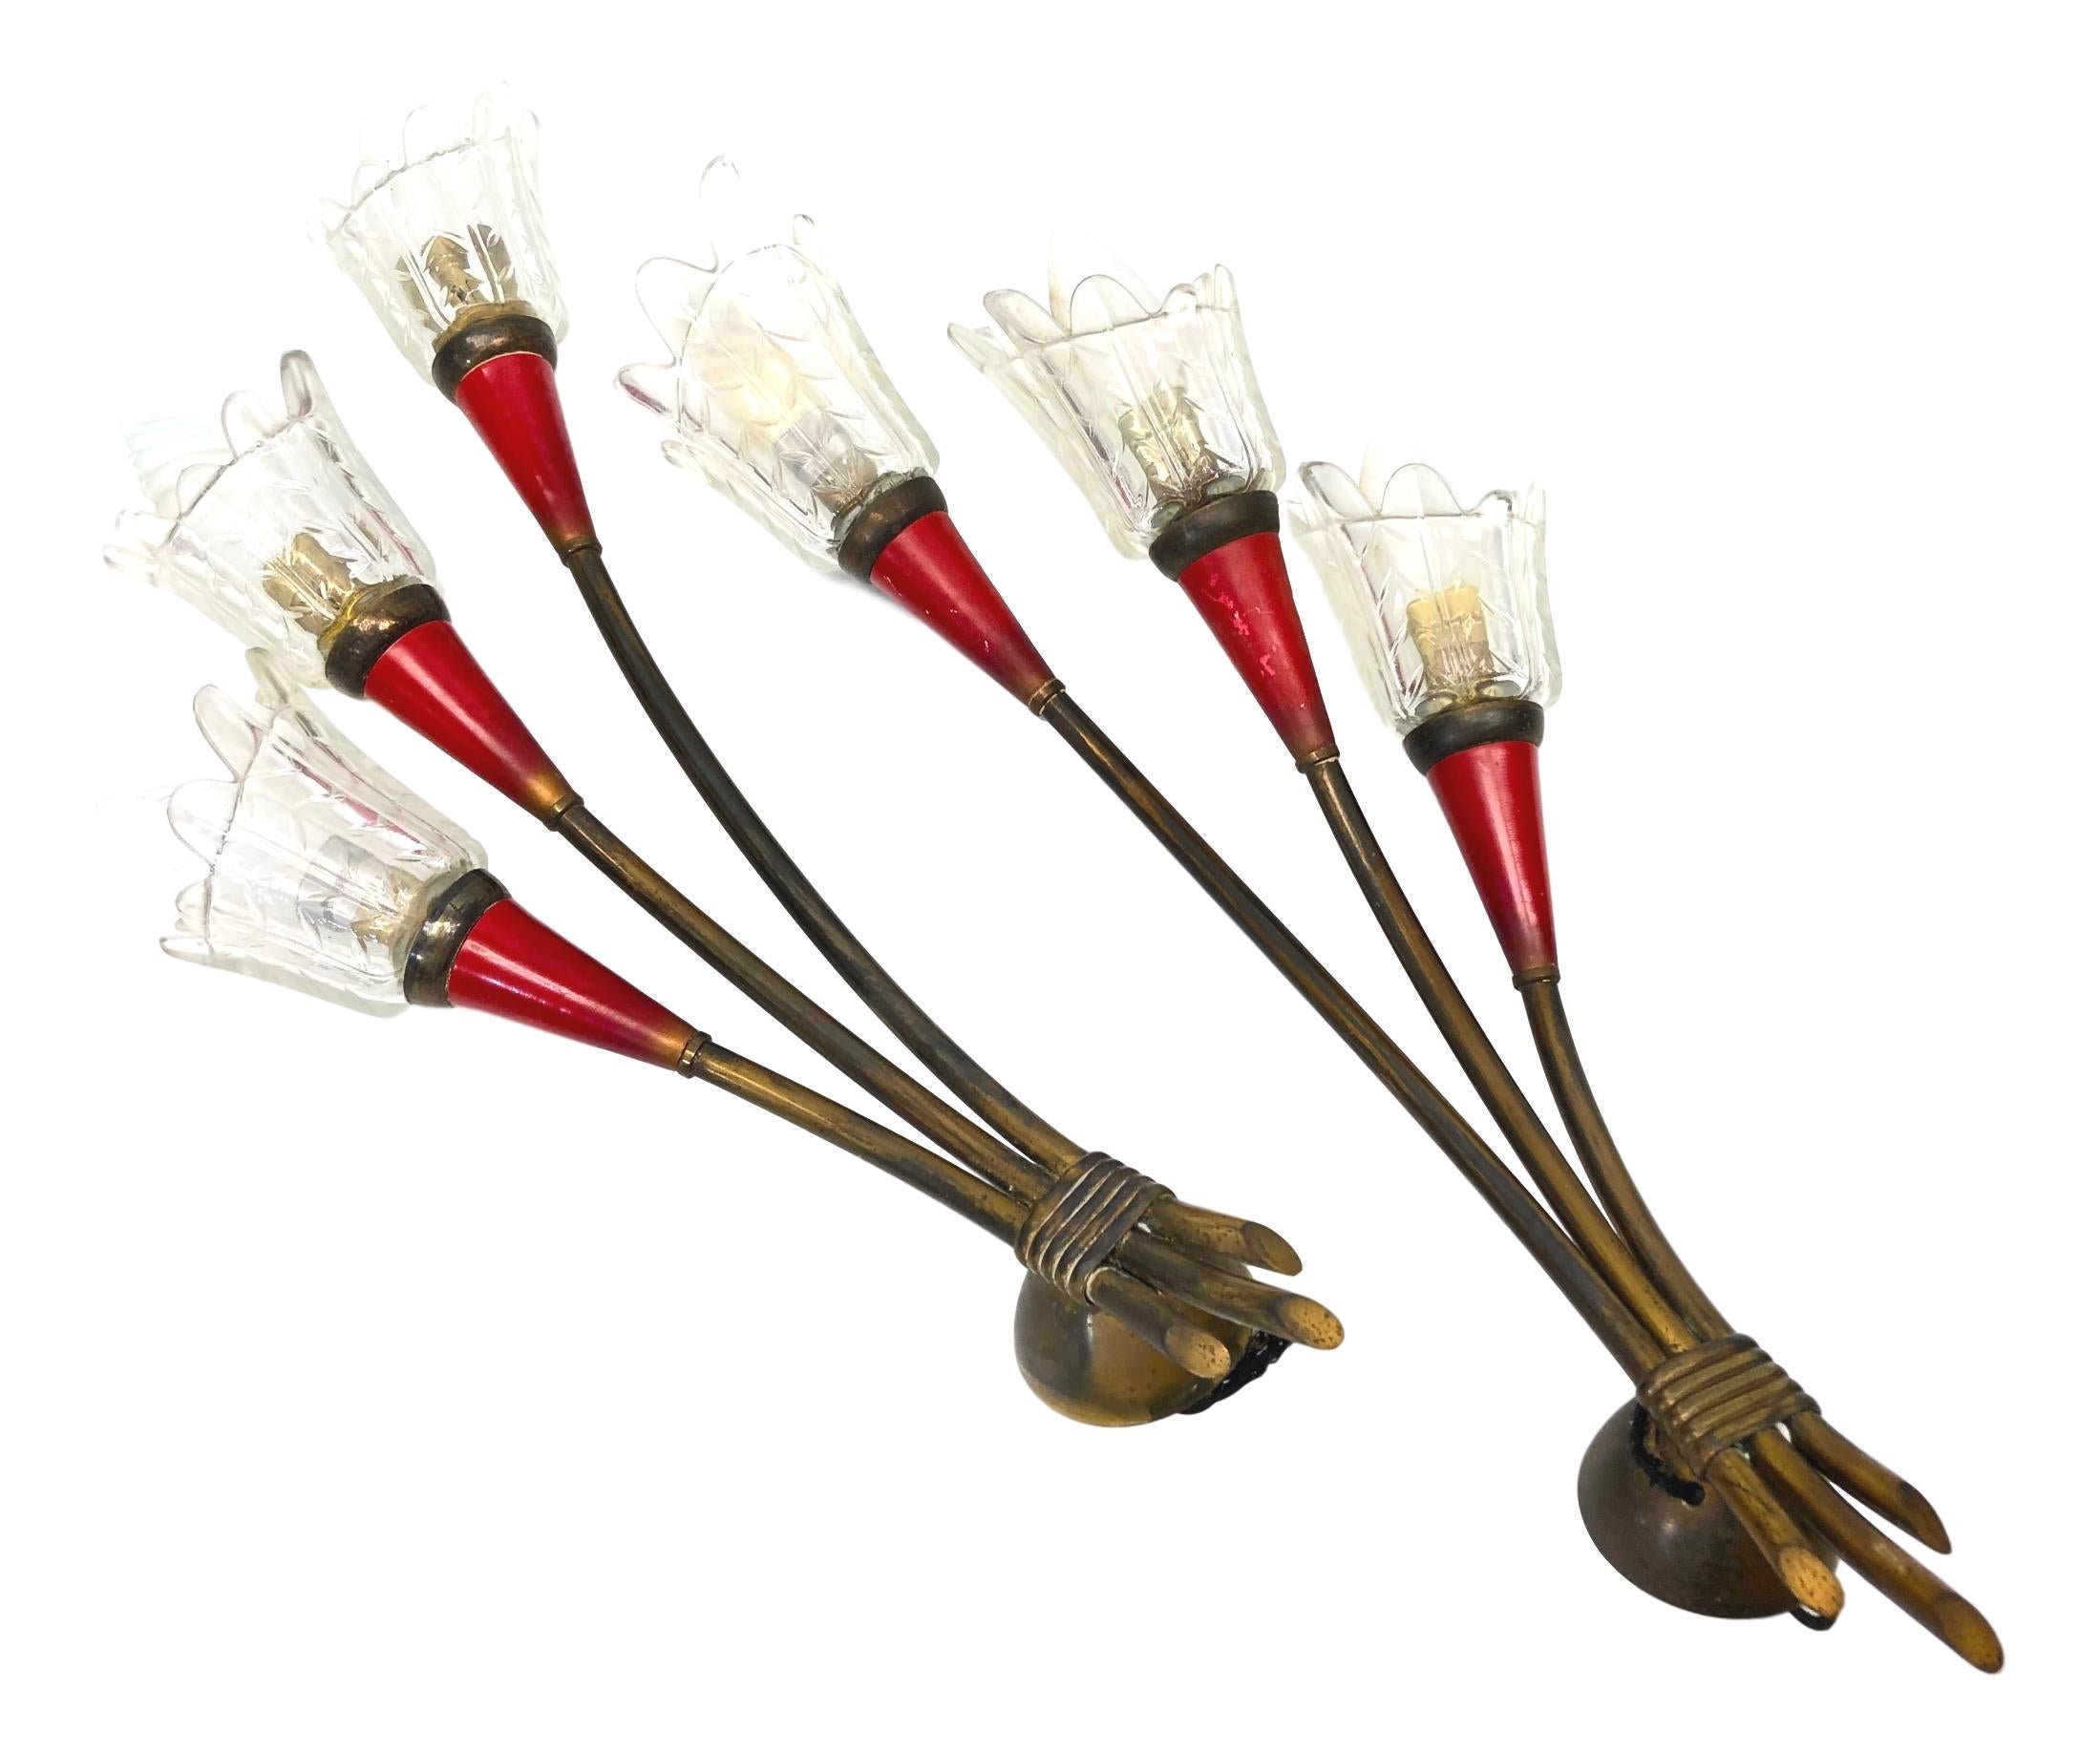 Delightful 1950s French modern wall lights by Maison Lunel in the shape of a flower bouquet. Brass hardware with ruby colored Lucite and clear glass shades. Very good original vintage condition with some loss of paint on the lacquered parts. Each